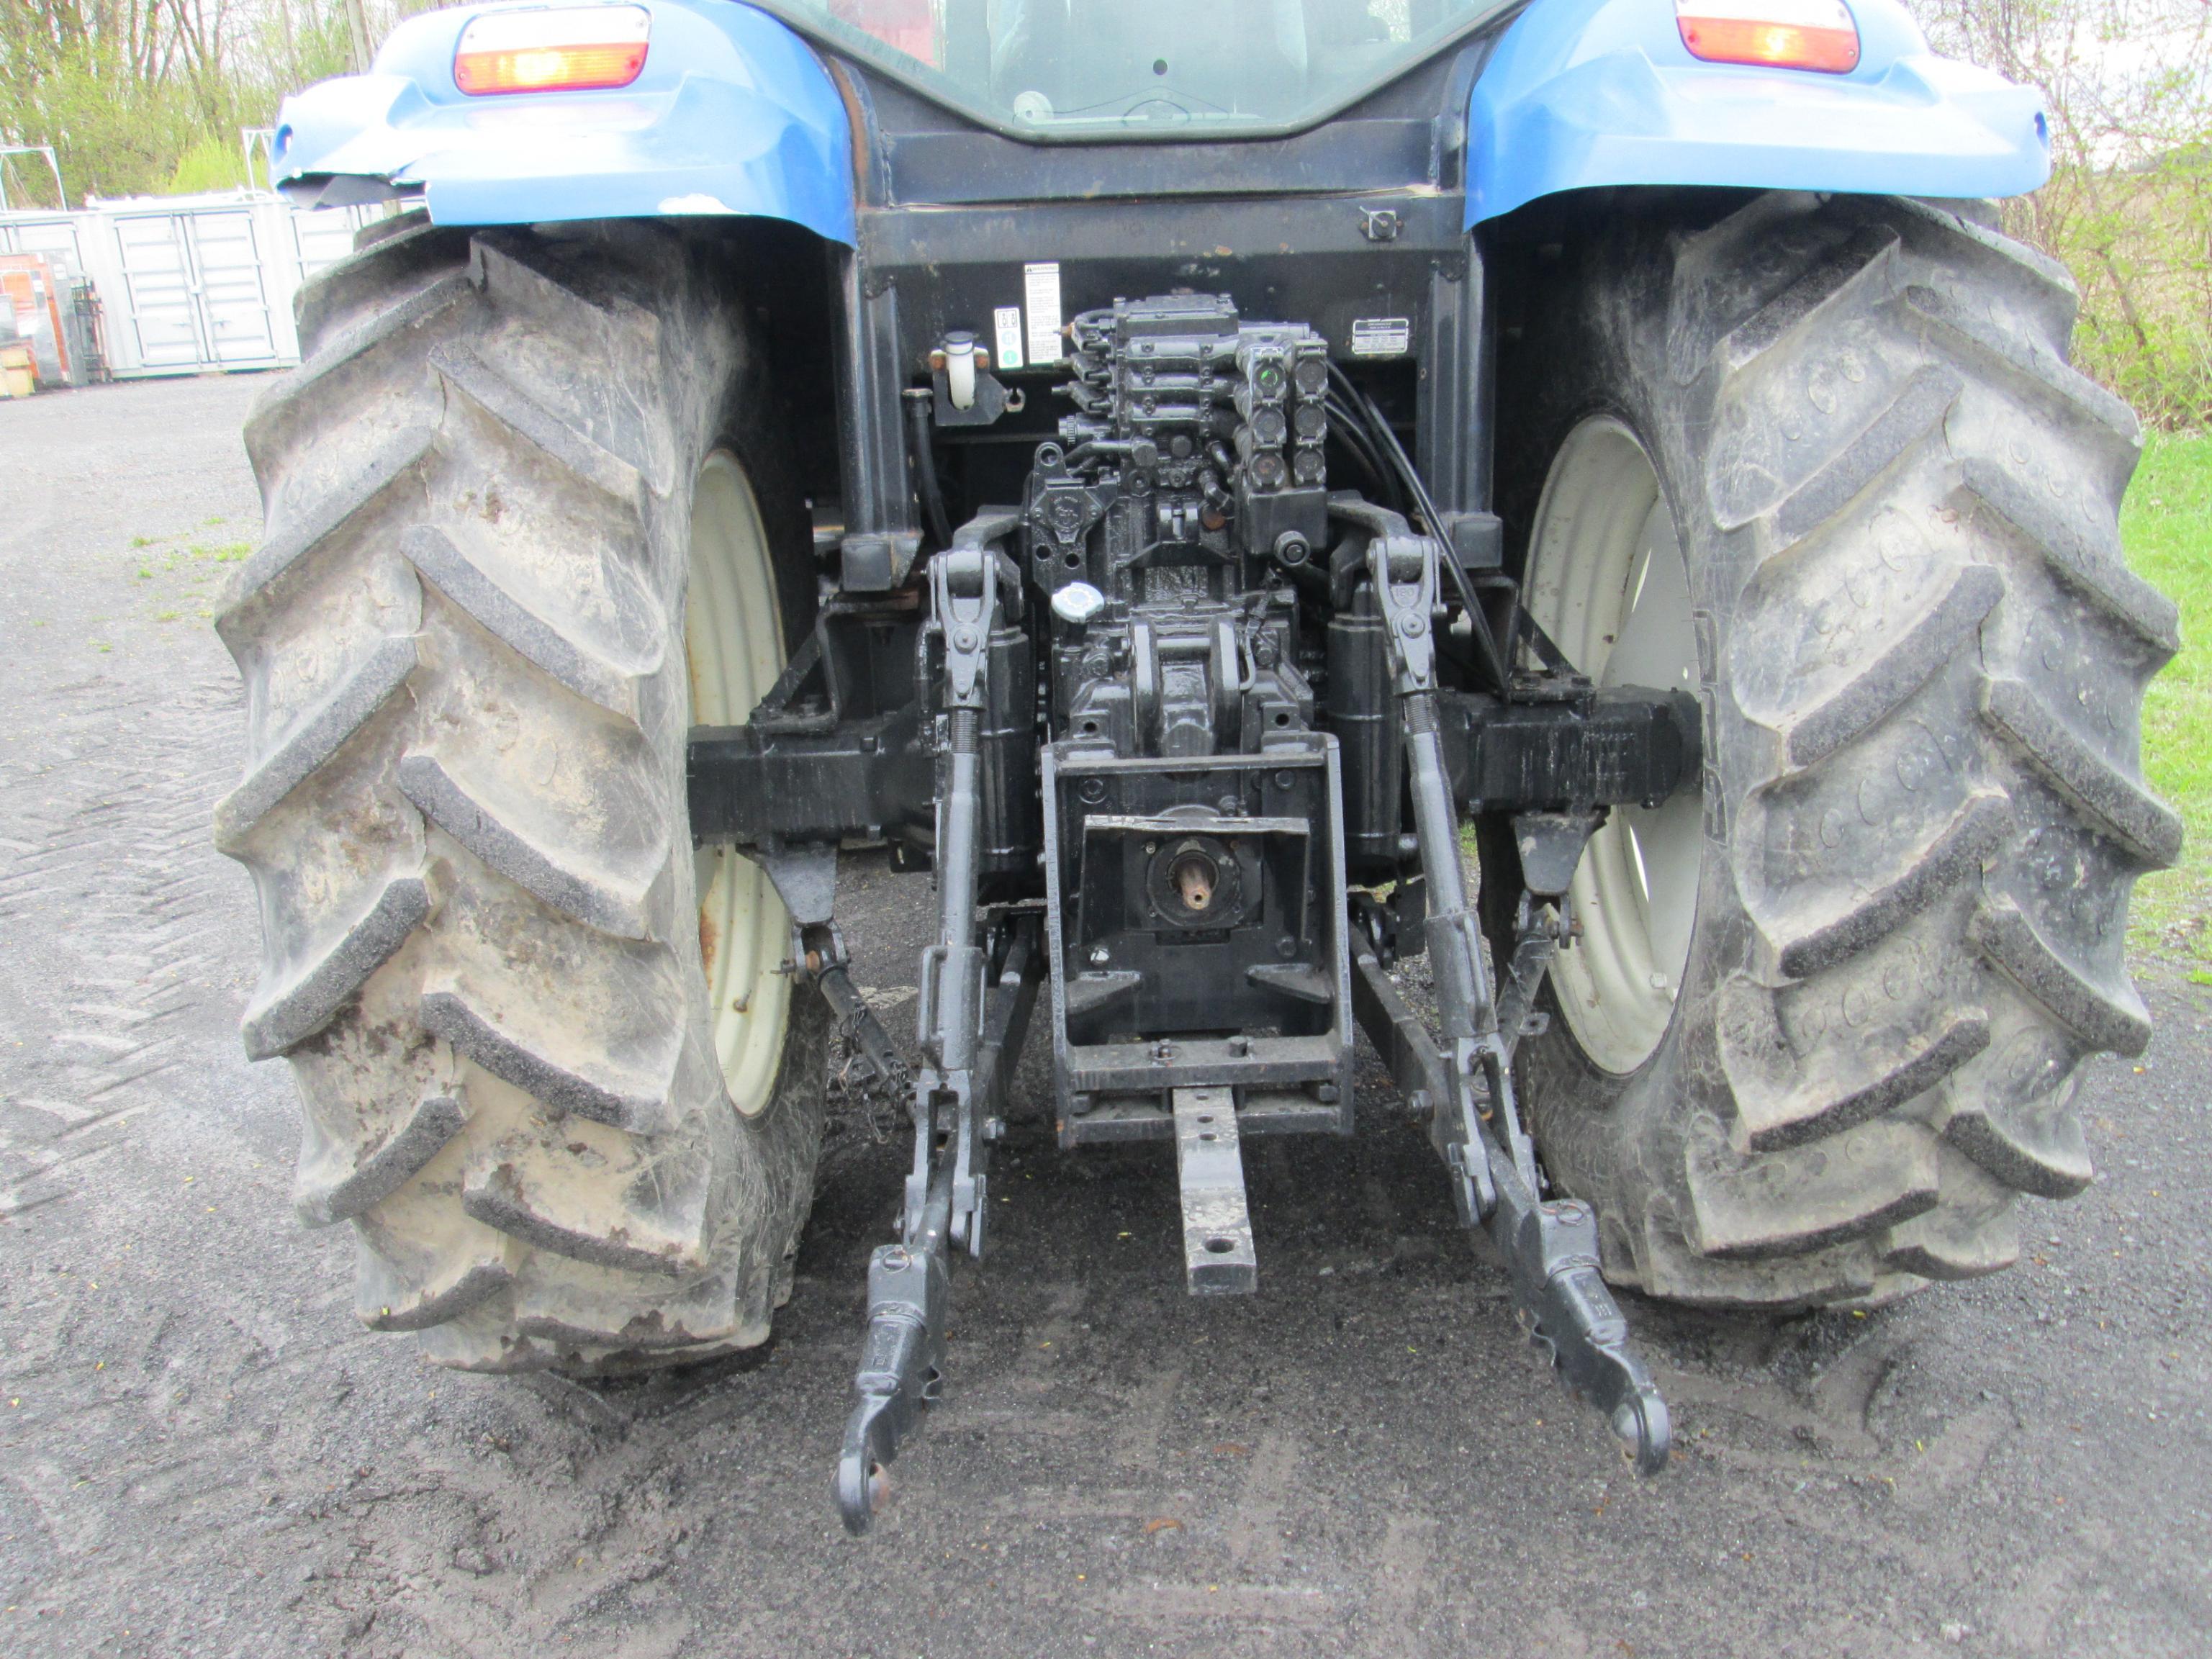 AGRICULTURAL TRACTOR NEW HOLLAND T6030 PLUS 4X4 TRACTOR SN Z7BDD4646 powered by diesel engine,